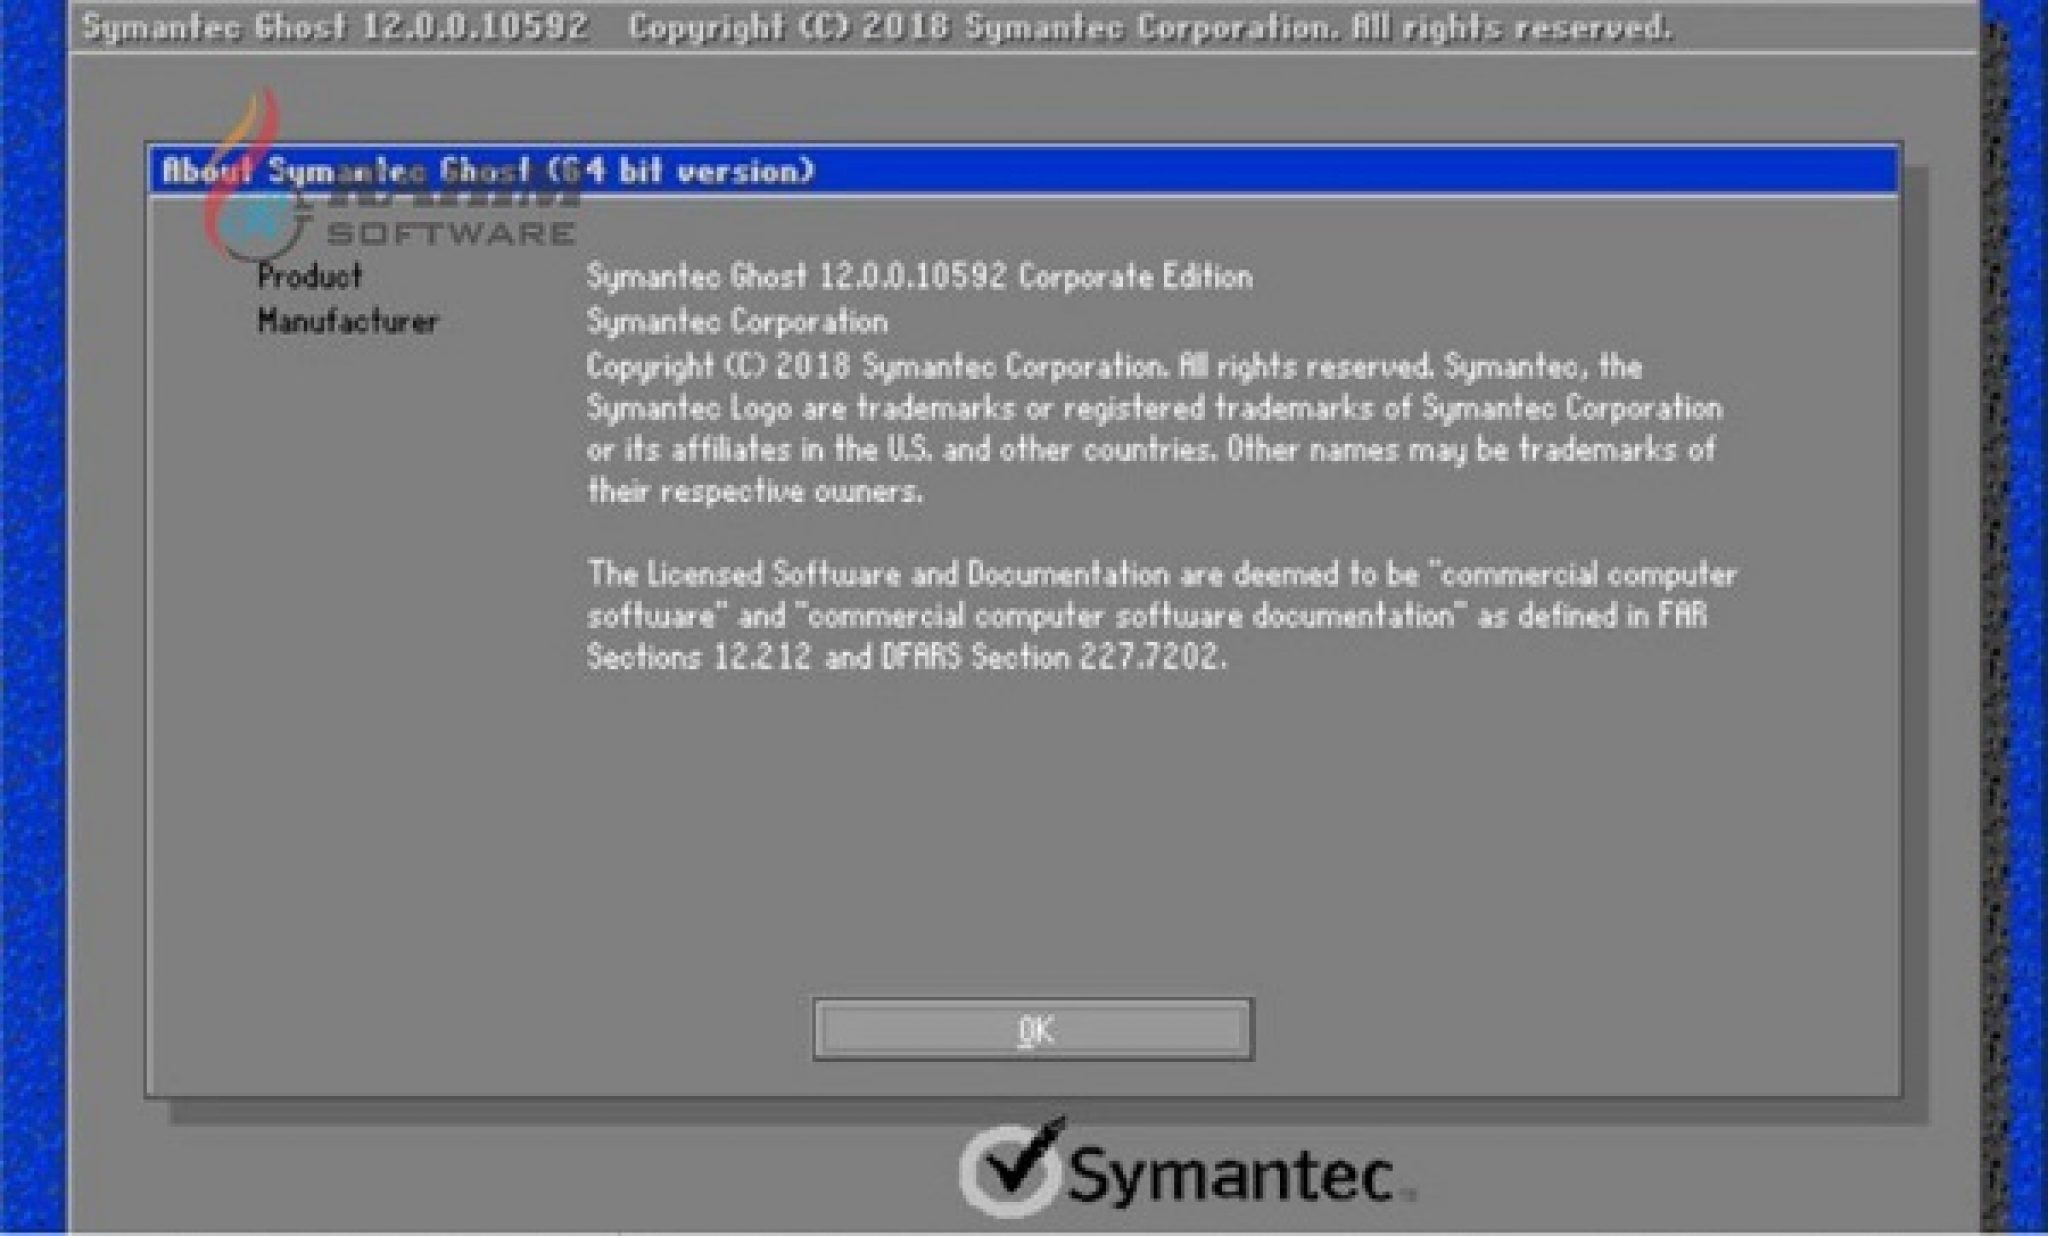 install arabic language pack windows xp without cd